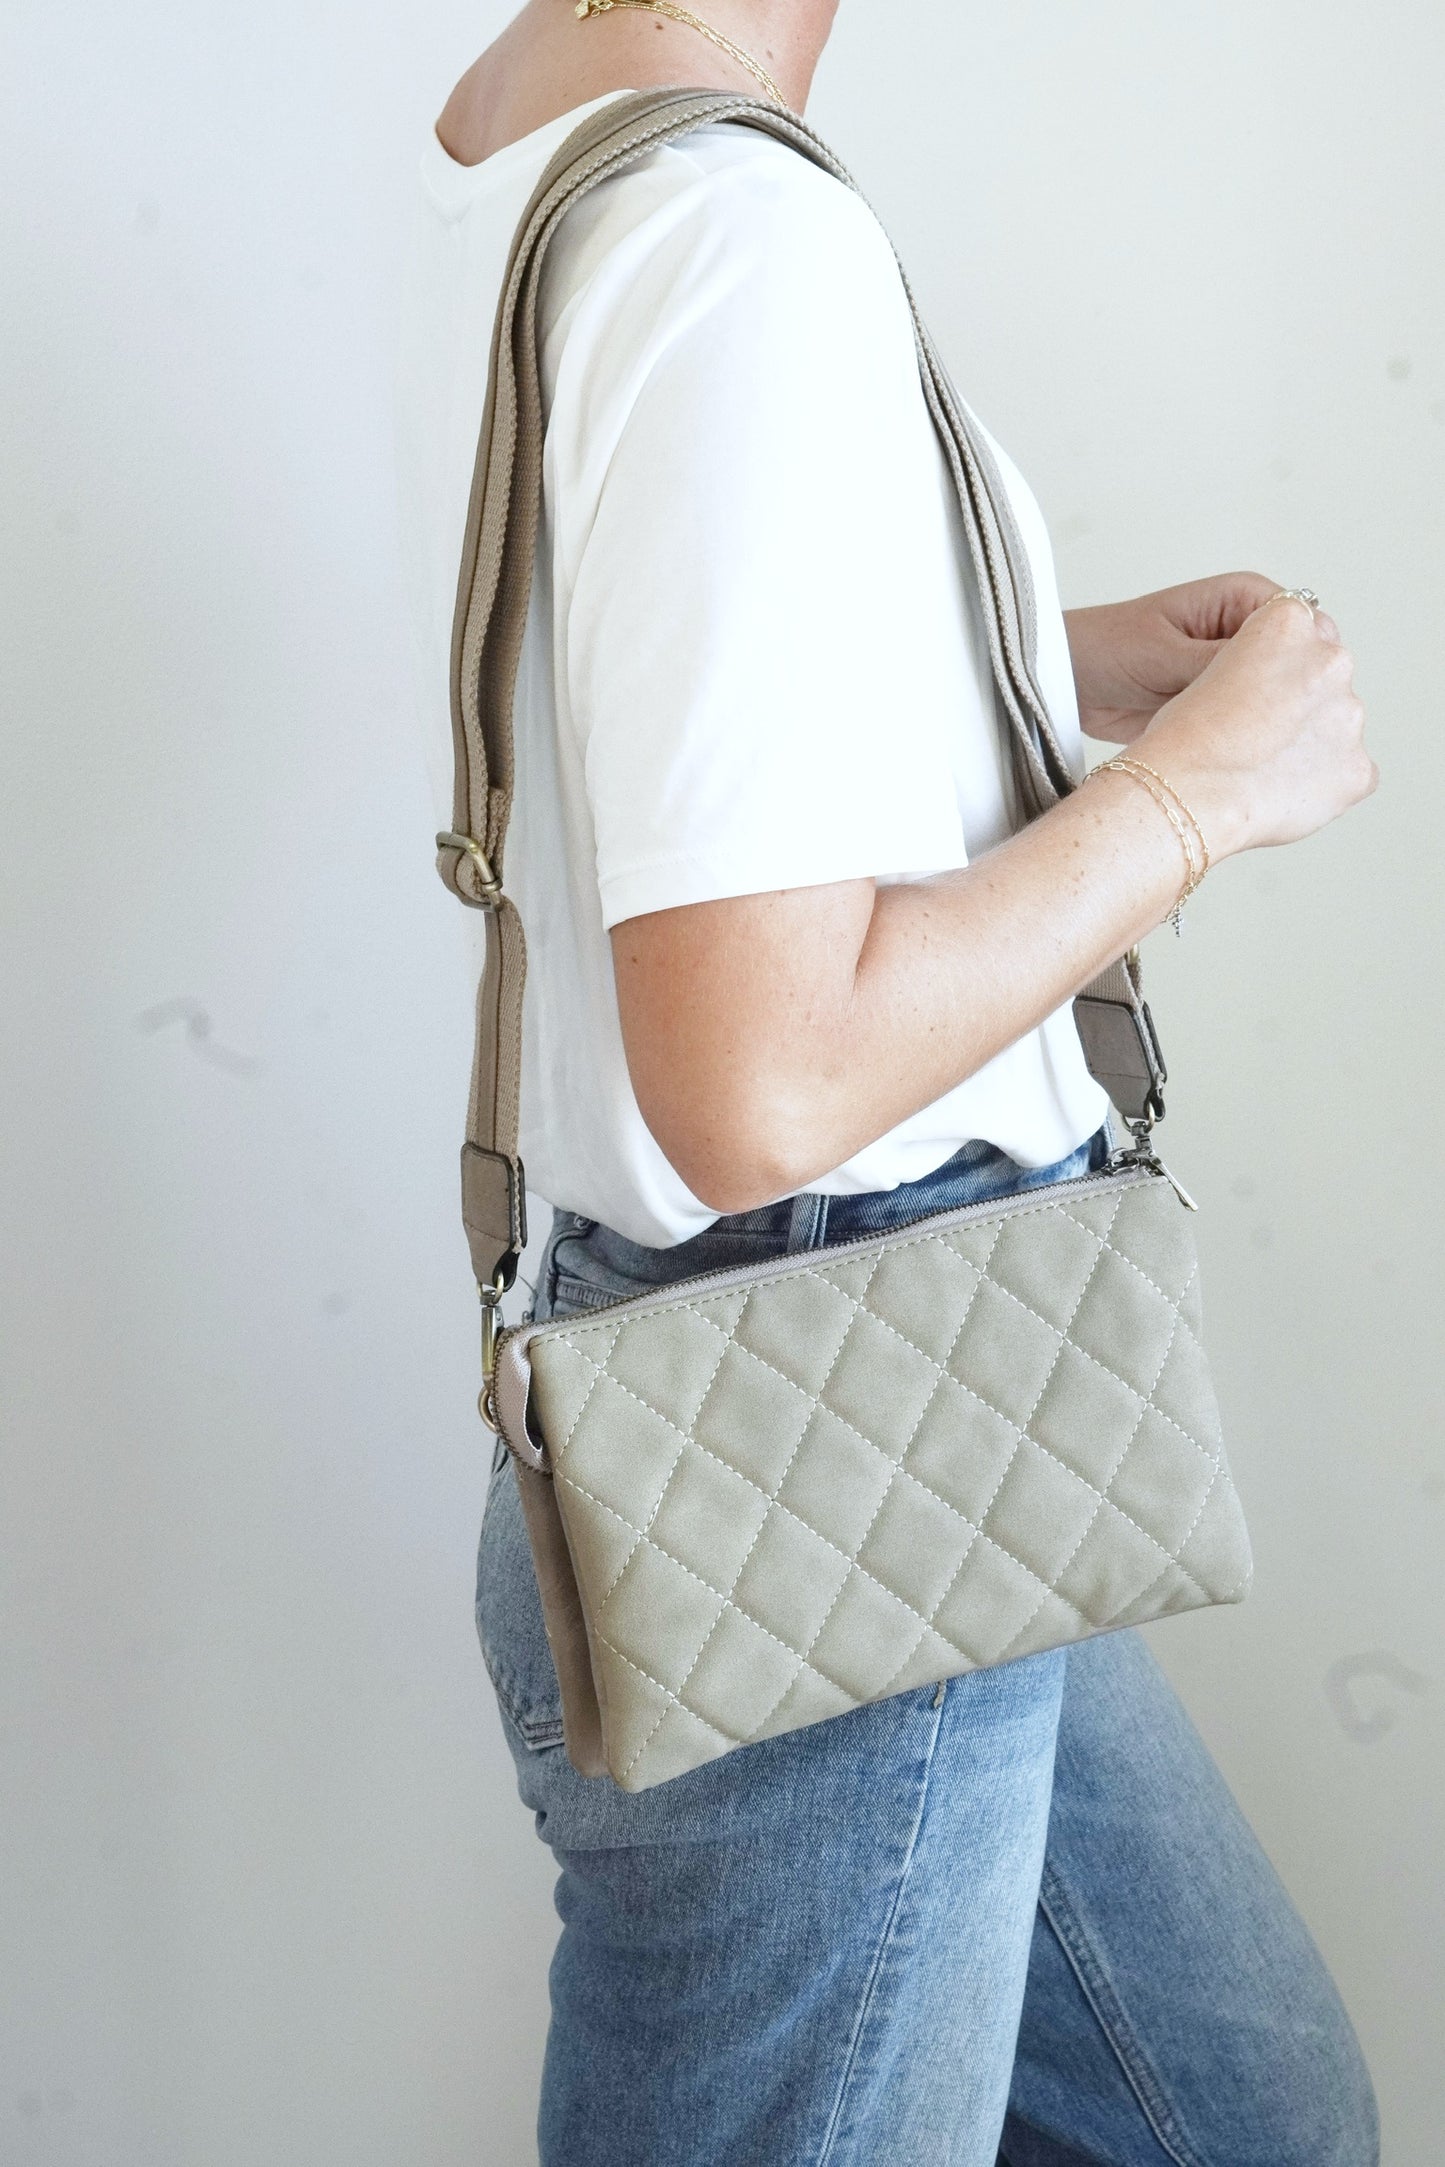 Izzy Quilted Oversized Crossbody Wallet Quilted Pattern Expandable Two Large Inner Pockets Middle Zipper Pocket Six Credit Card Slots Removeable Adjustable Guitar Strap and Wrist Strap Approx 10 in. x 6 1/2 in. x 1 1/2 in. Bottom expands to approx. 5 in. grey taupe color